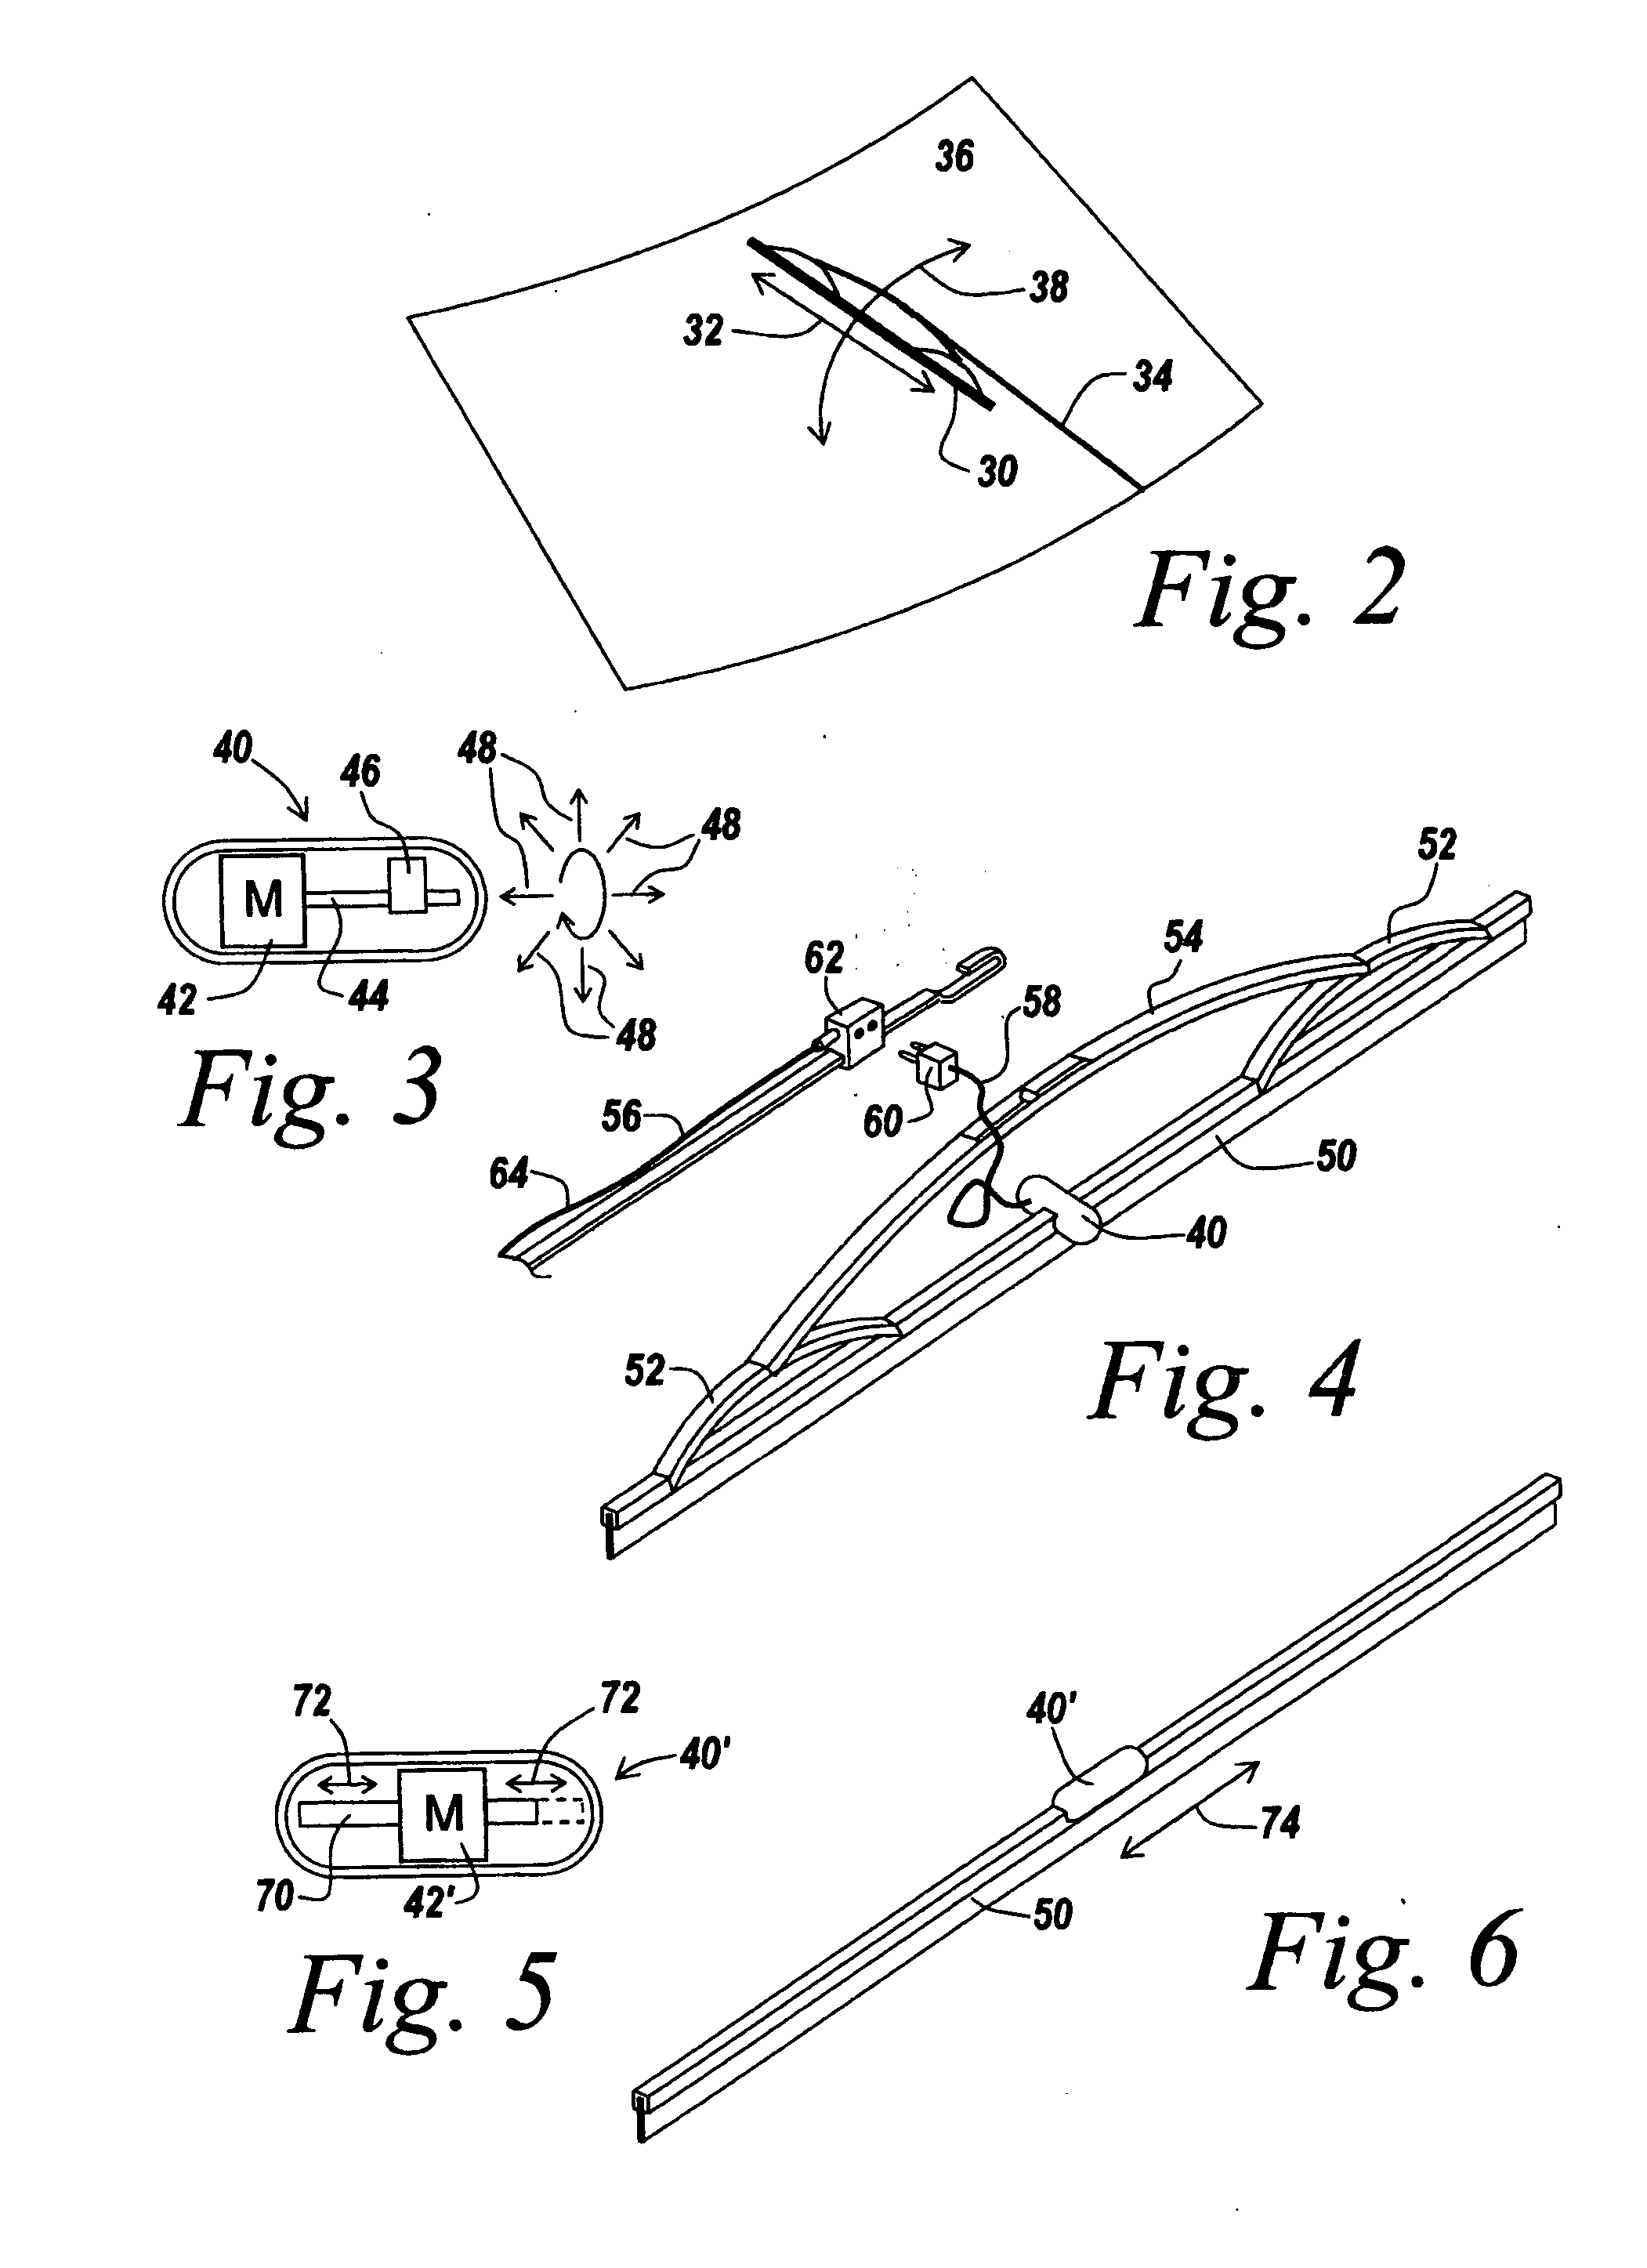 Method and apparatus for improving windshield wiper performance using a vibrating windshield wiper blade